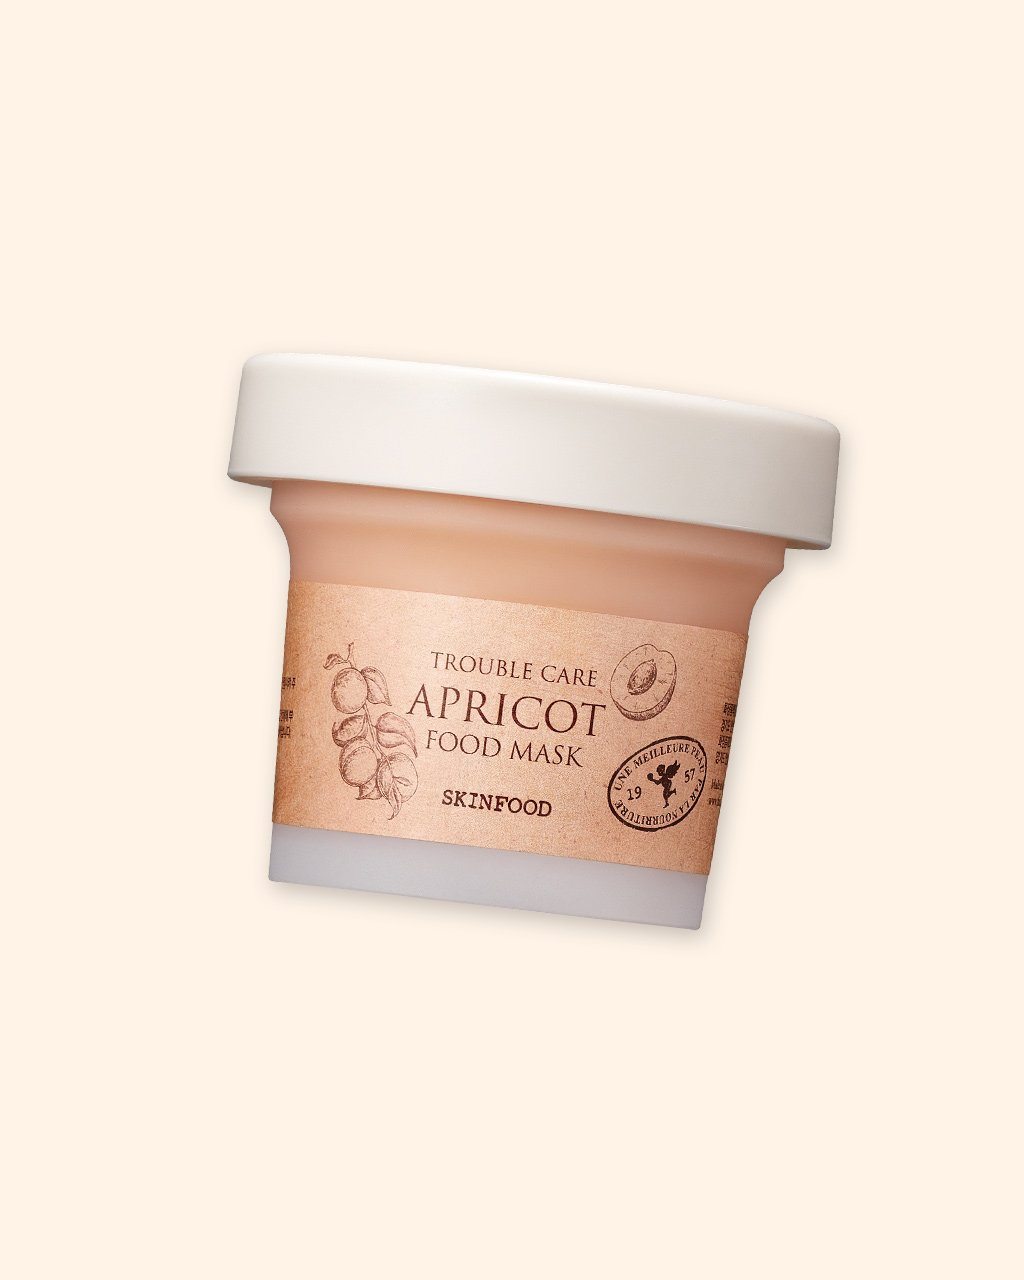 Apricot Food Mask Product